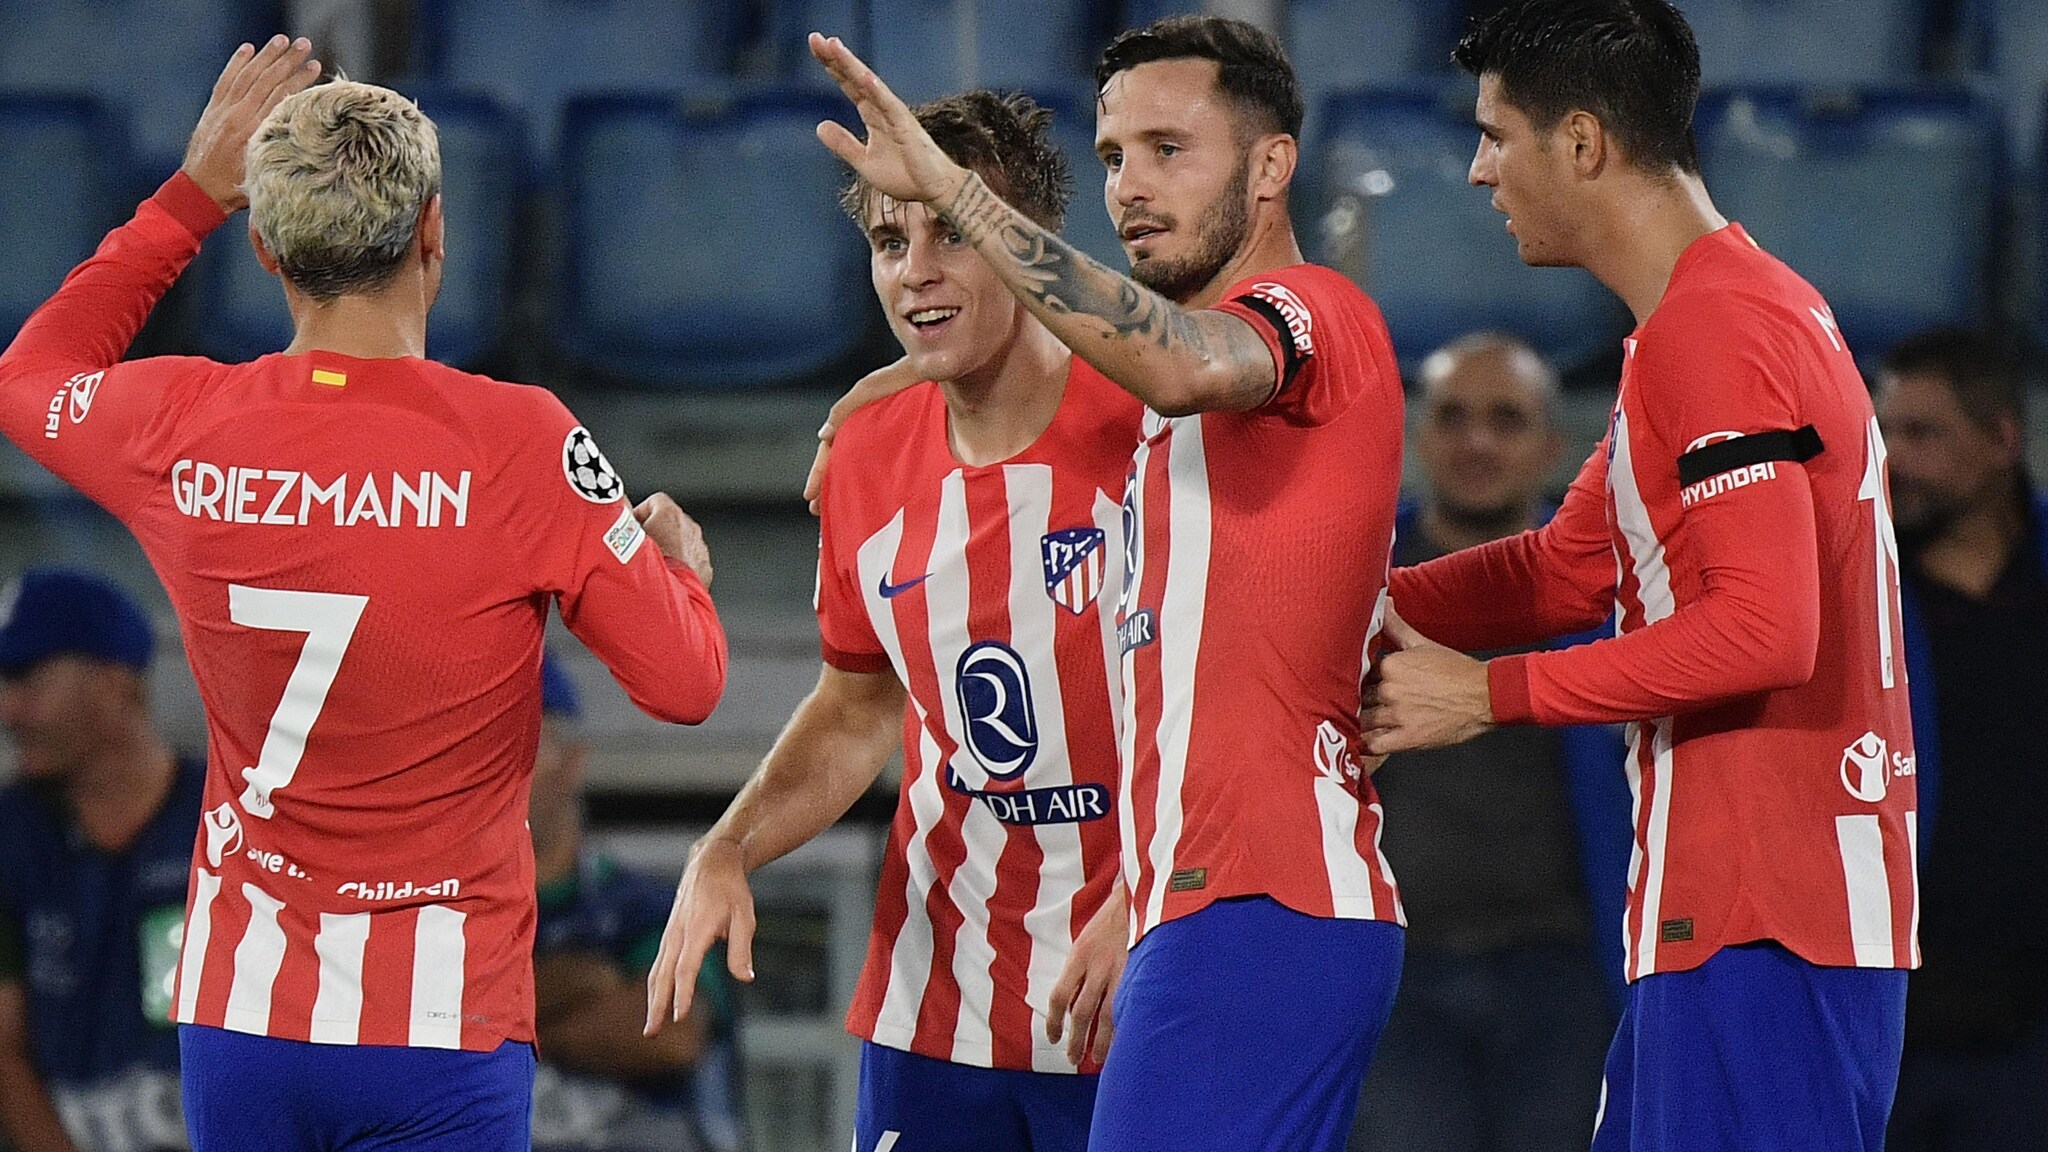 Atletico beats Feyenoord 3-1 to reach Champions League knockout stage